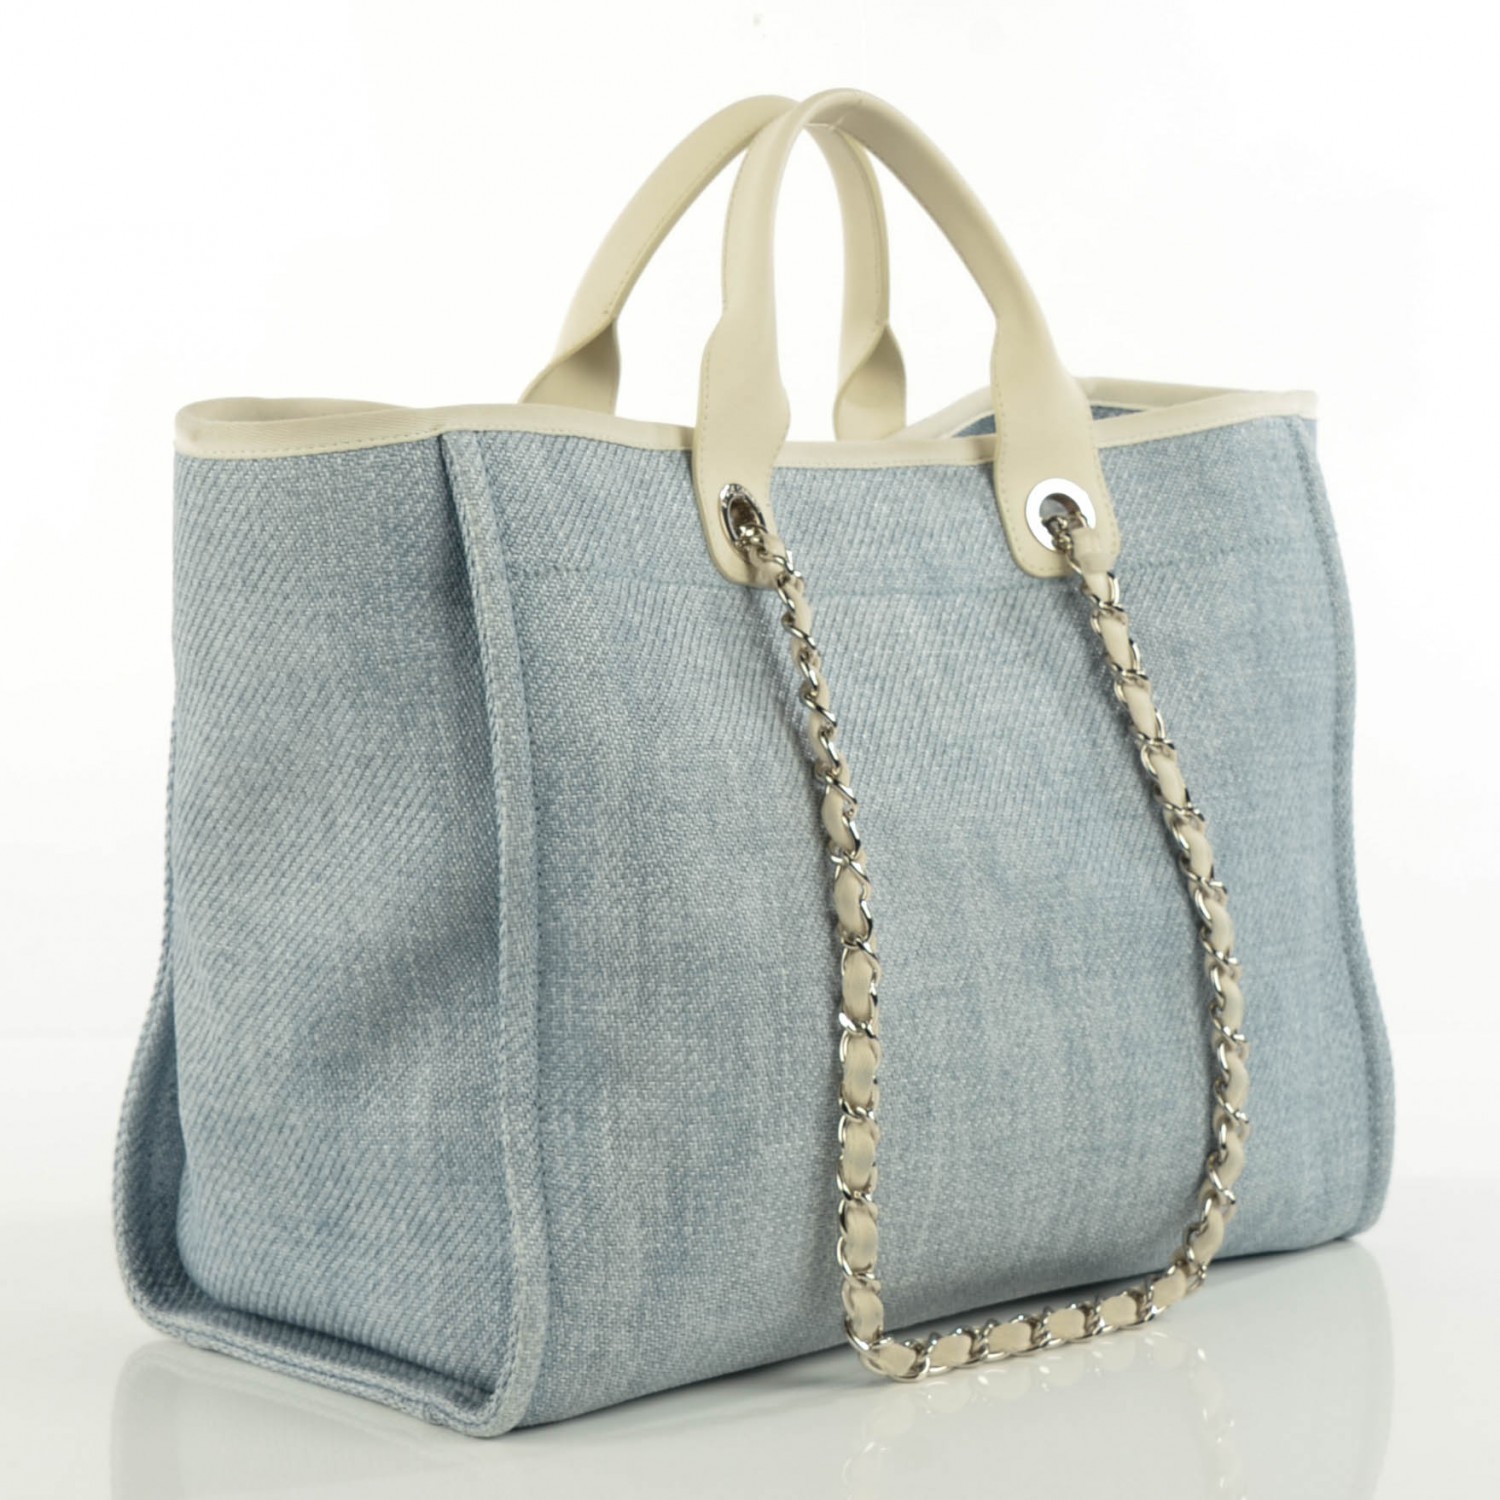 CHANEL Canvas Deauville Large Tote Light Blue 111326